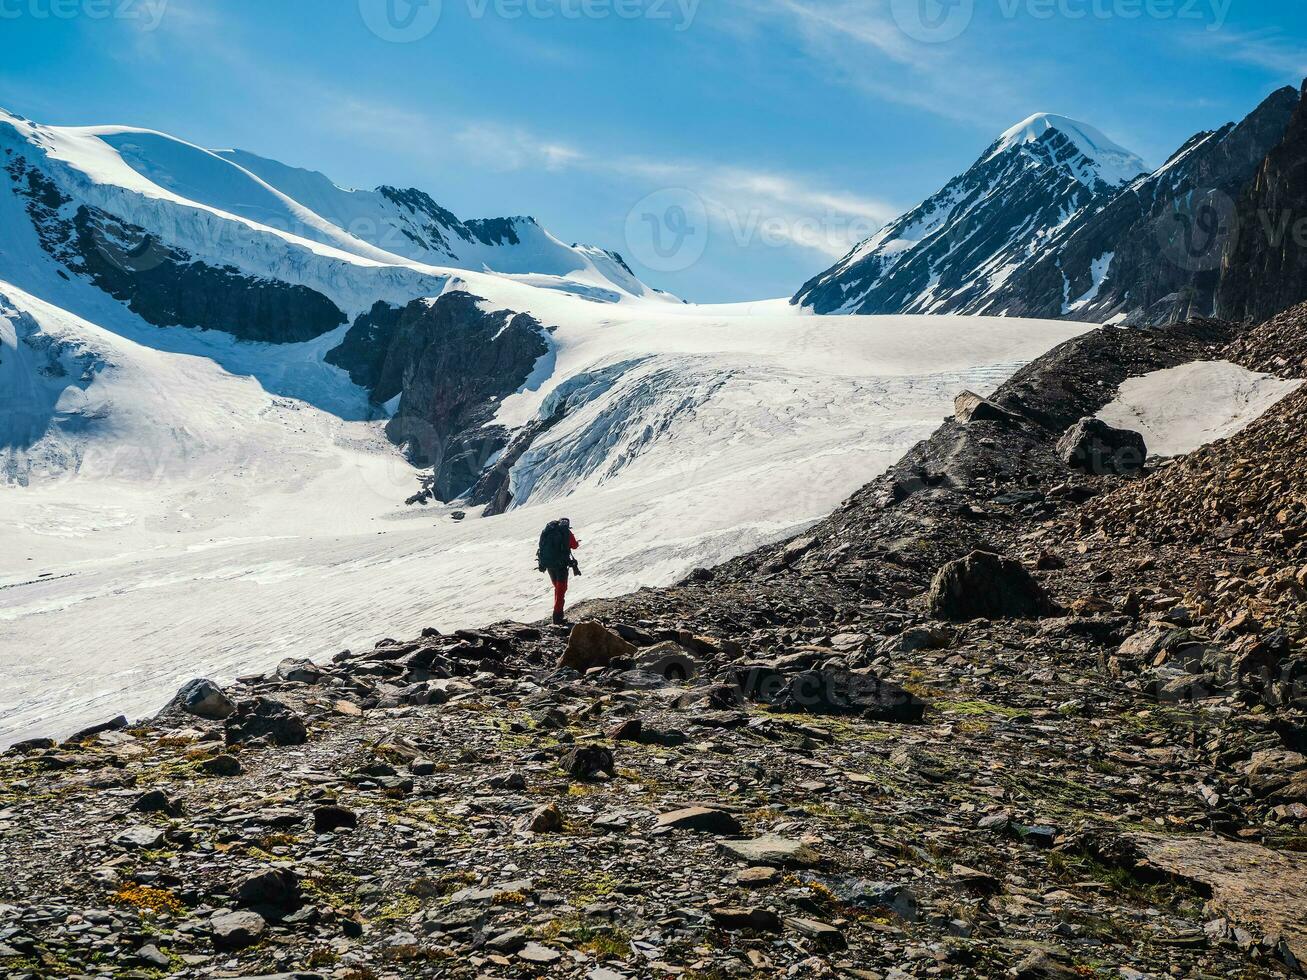 Solo trekking in the mountains. A male hikers down the mountain path. In the background, large snow-capped mountains. photo